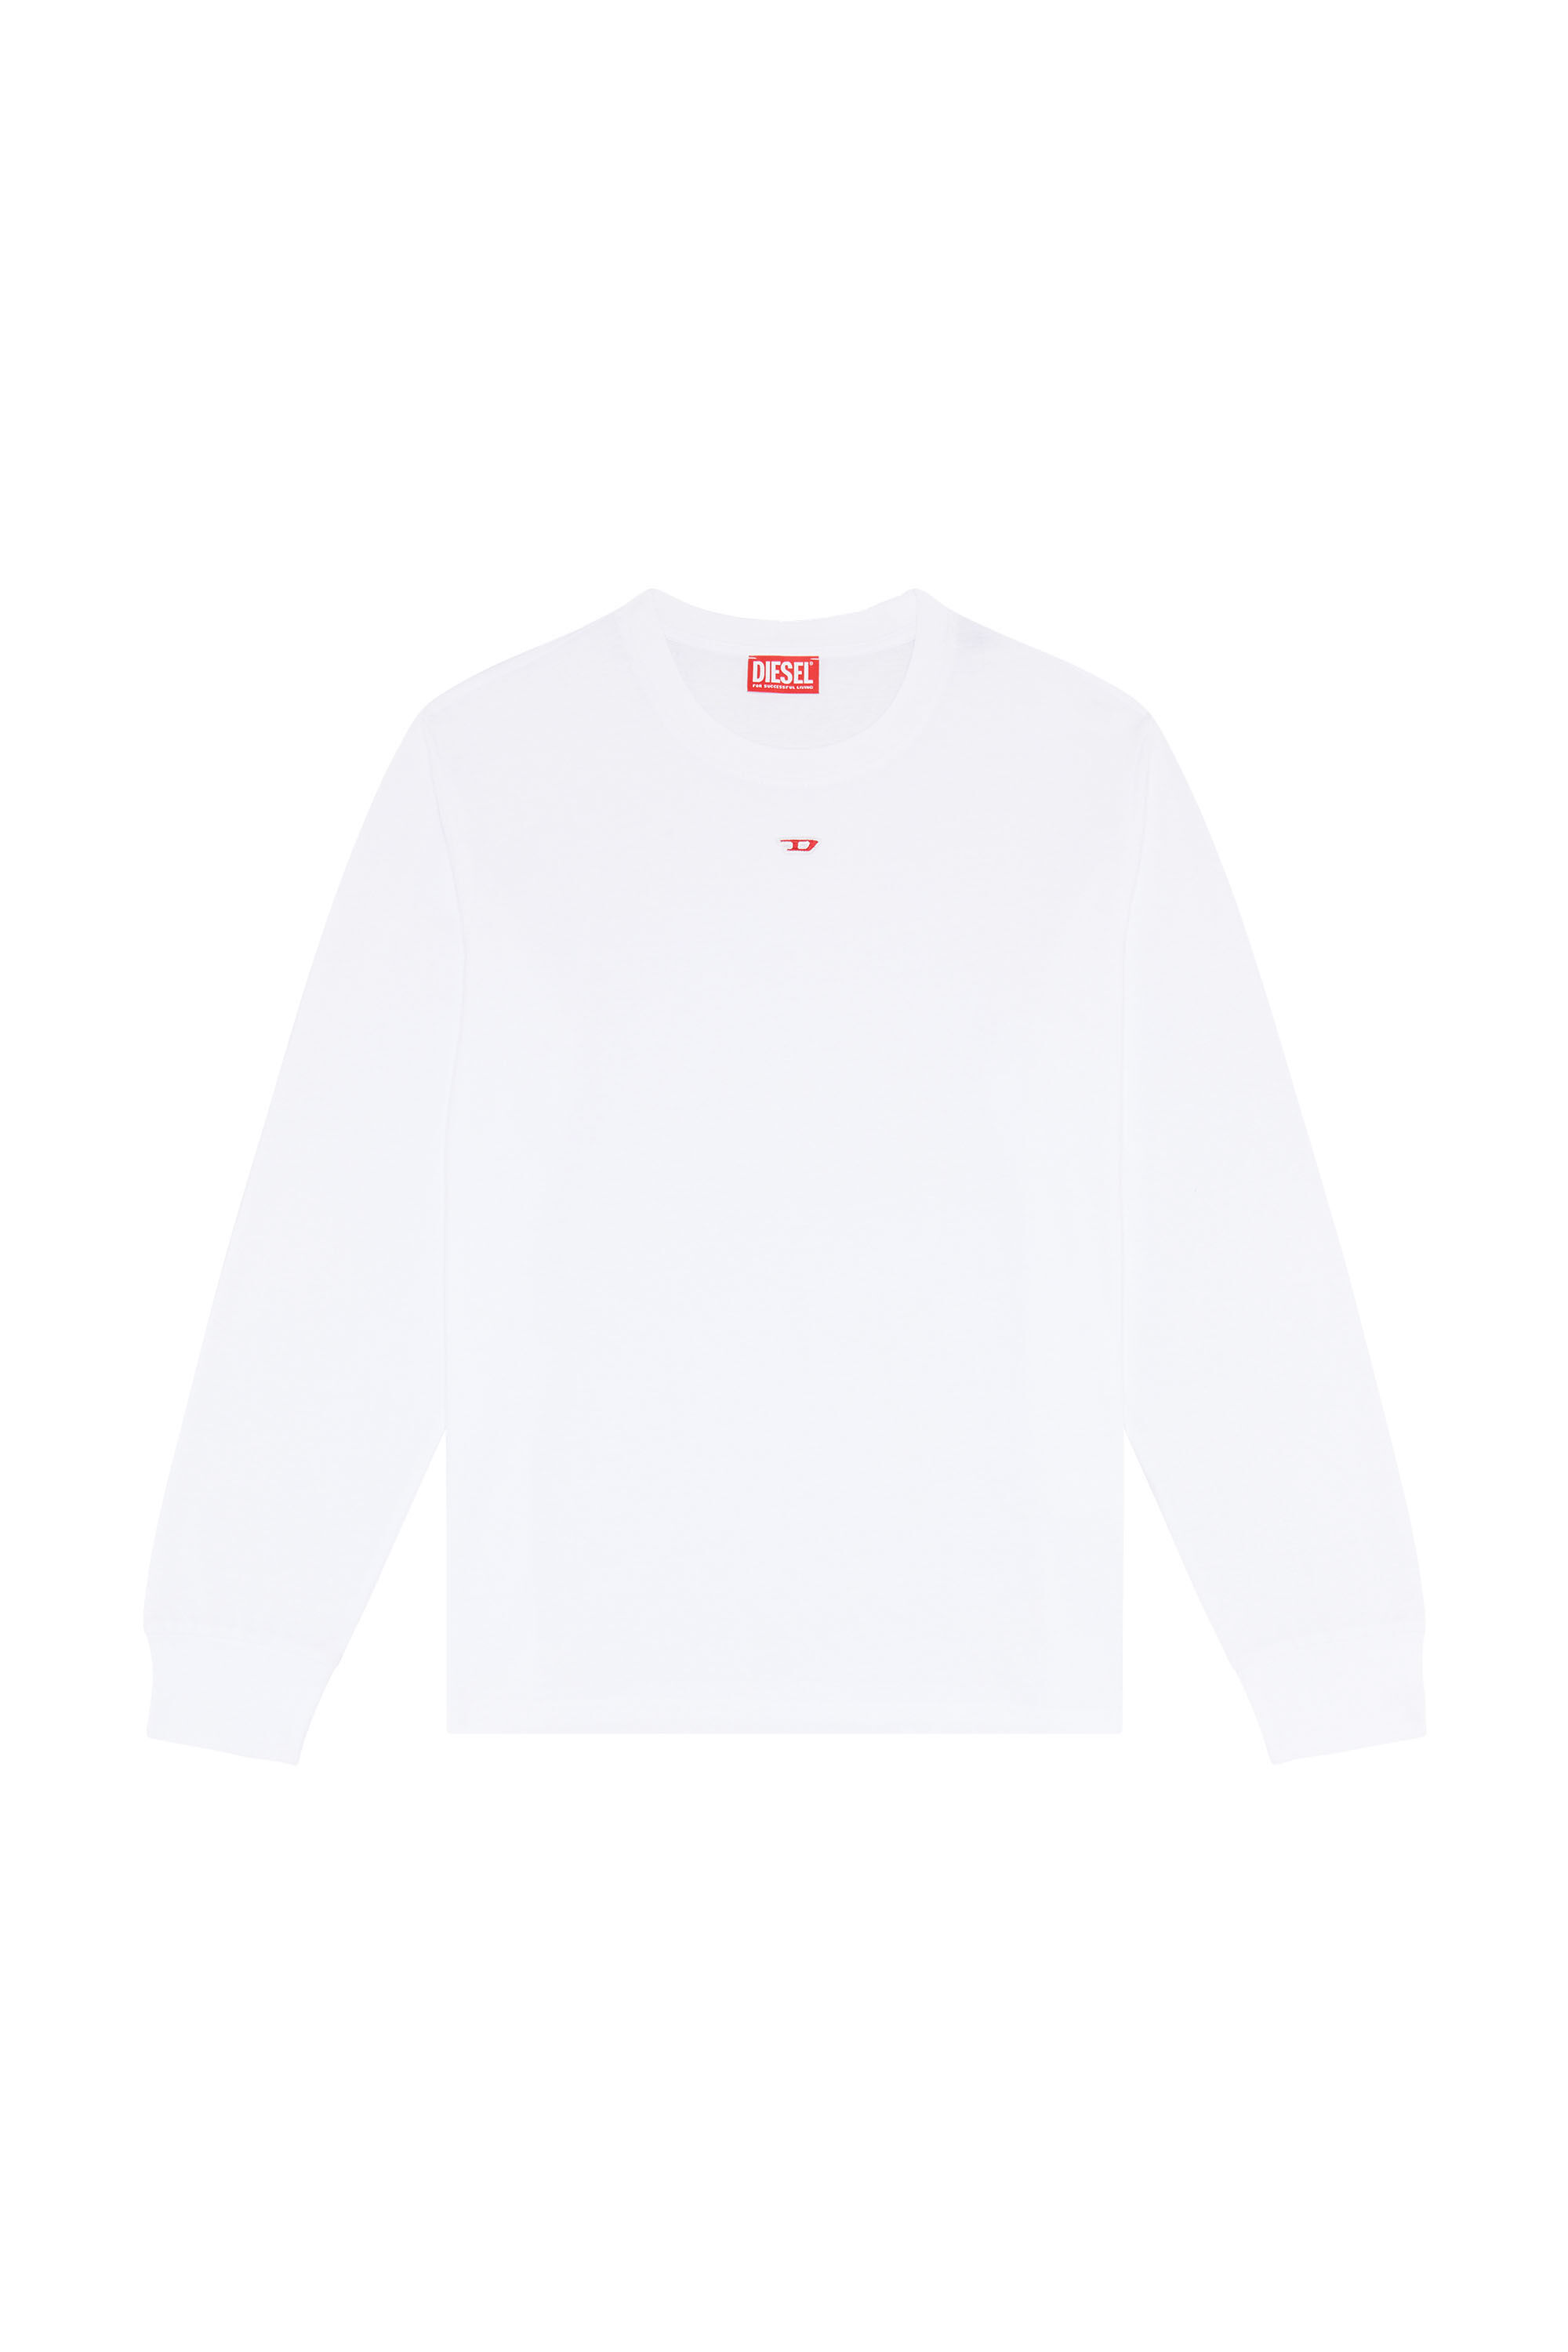 T-JUST-LS-D Man: Long-sleeve T-shirt with logo patch | Diesel